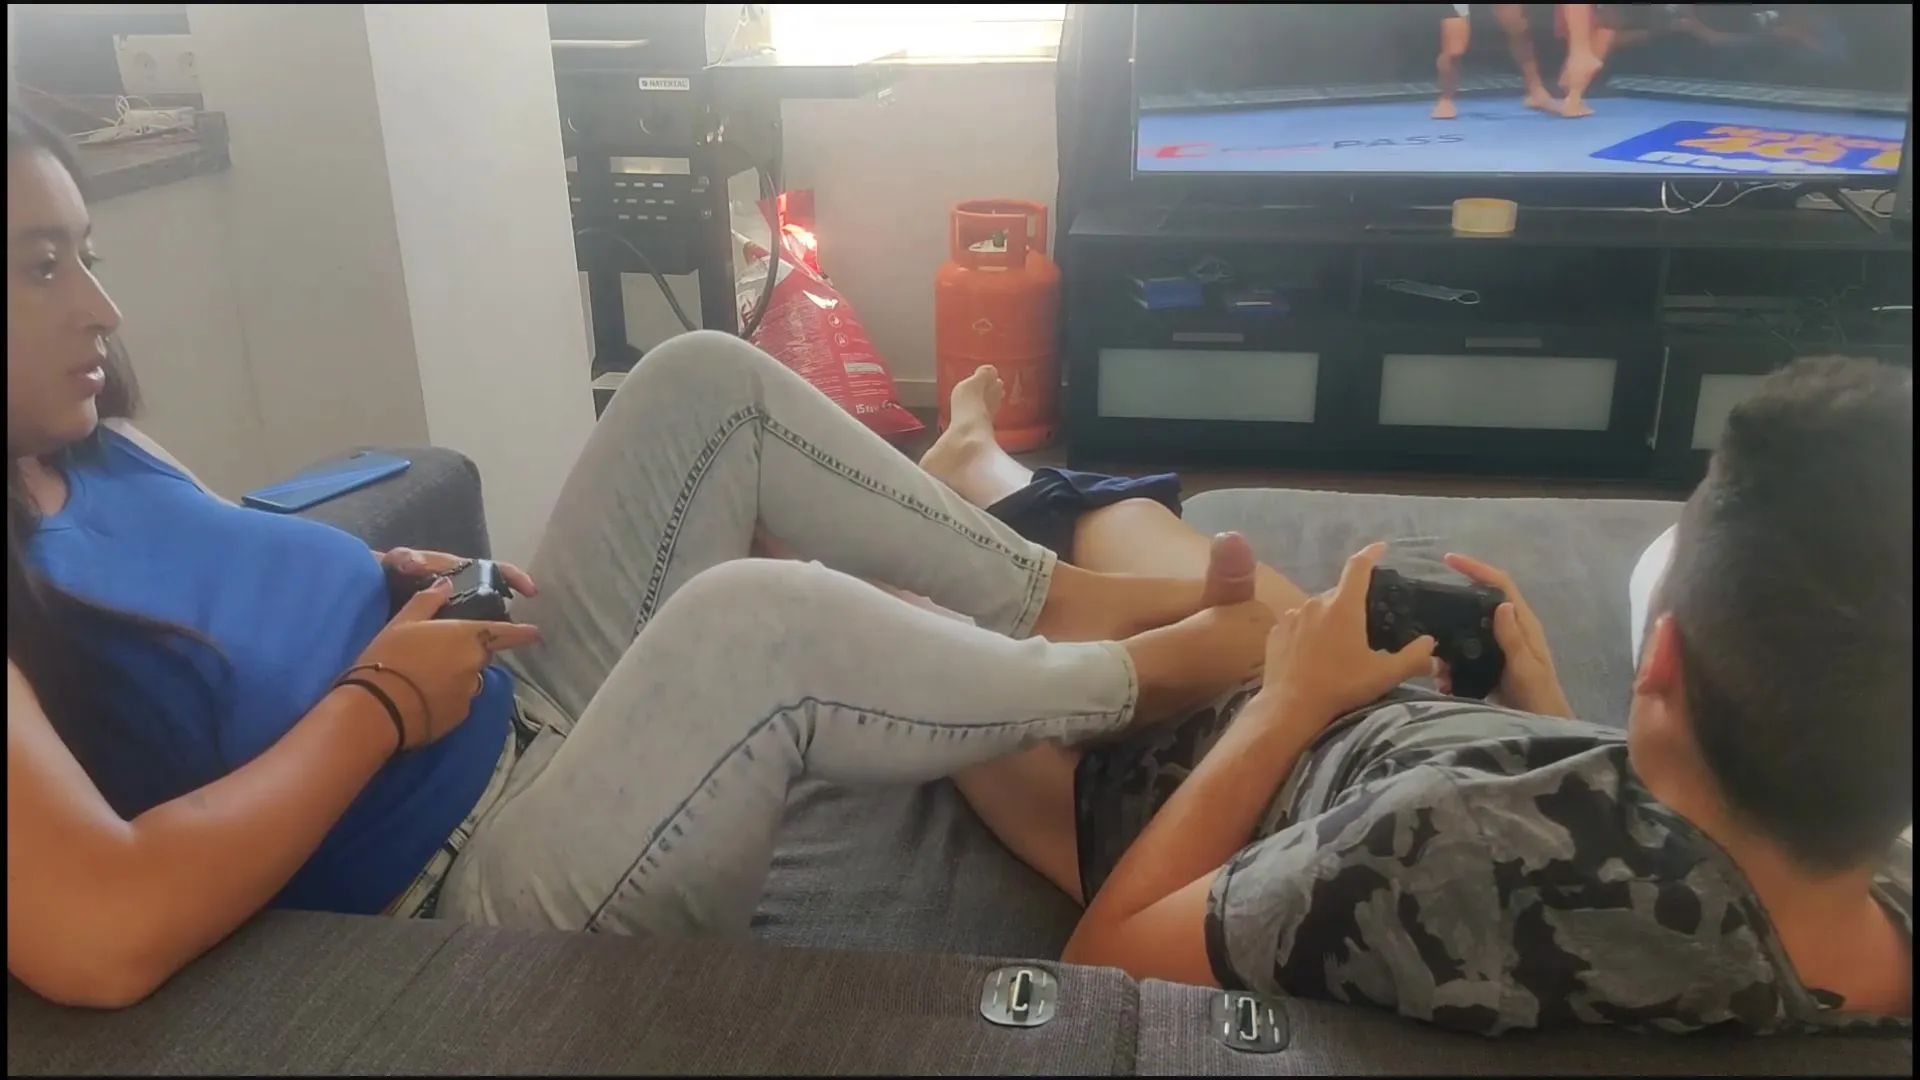 Friends GF Gives Footjob as We Play Porn Photo